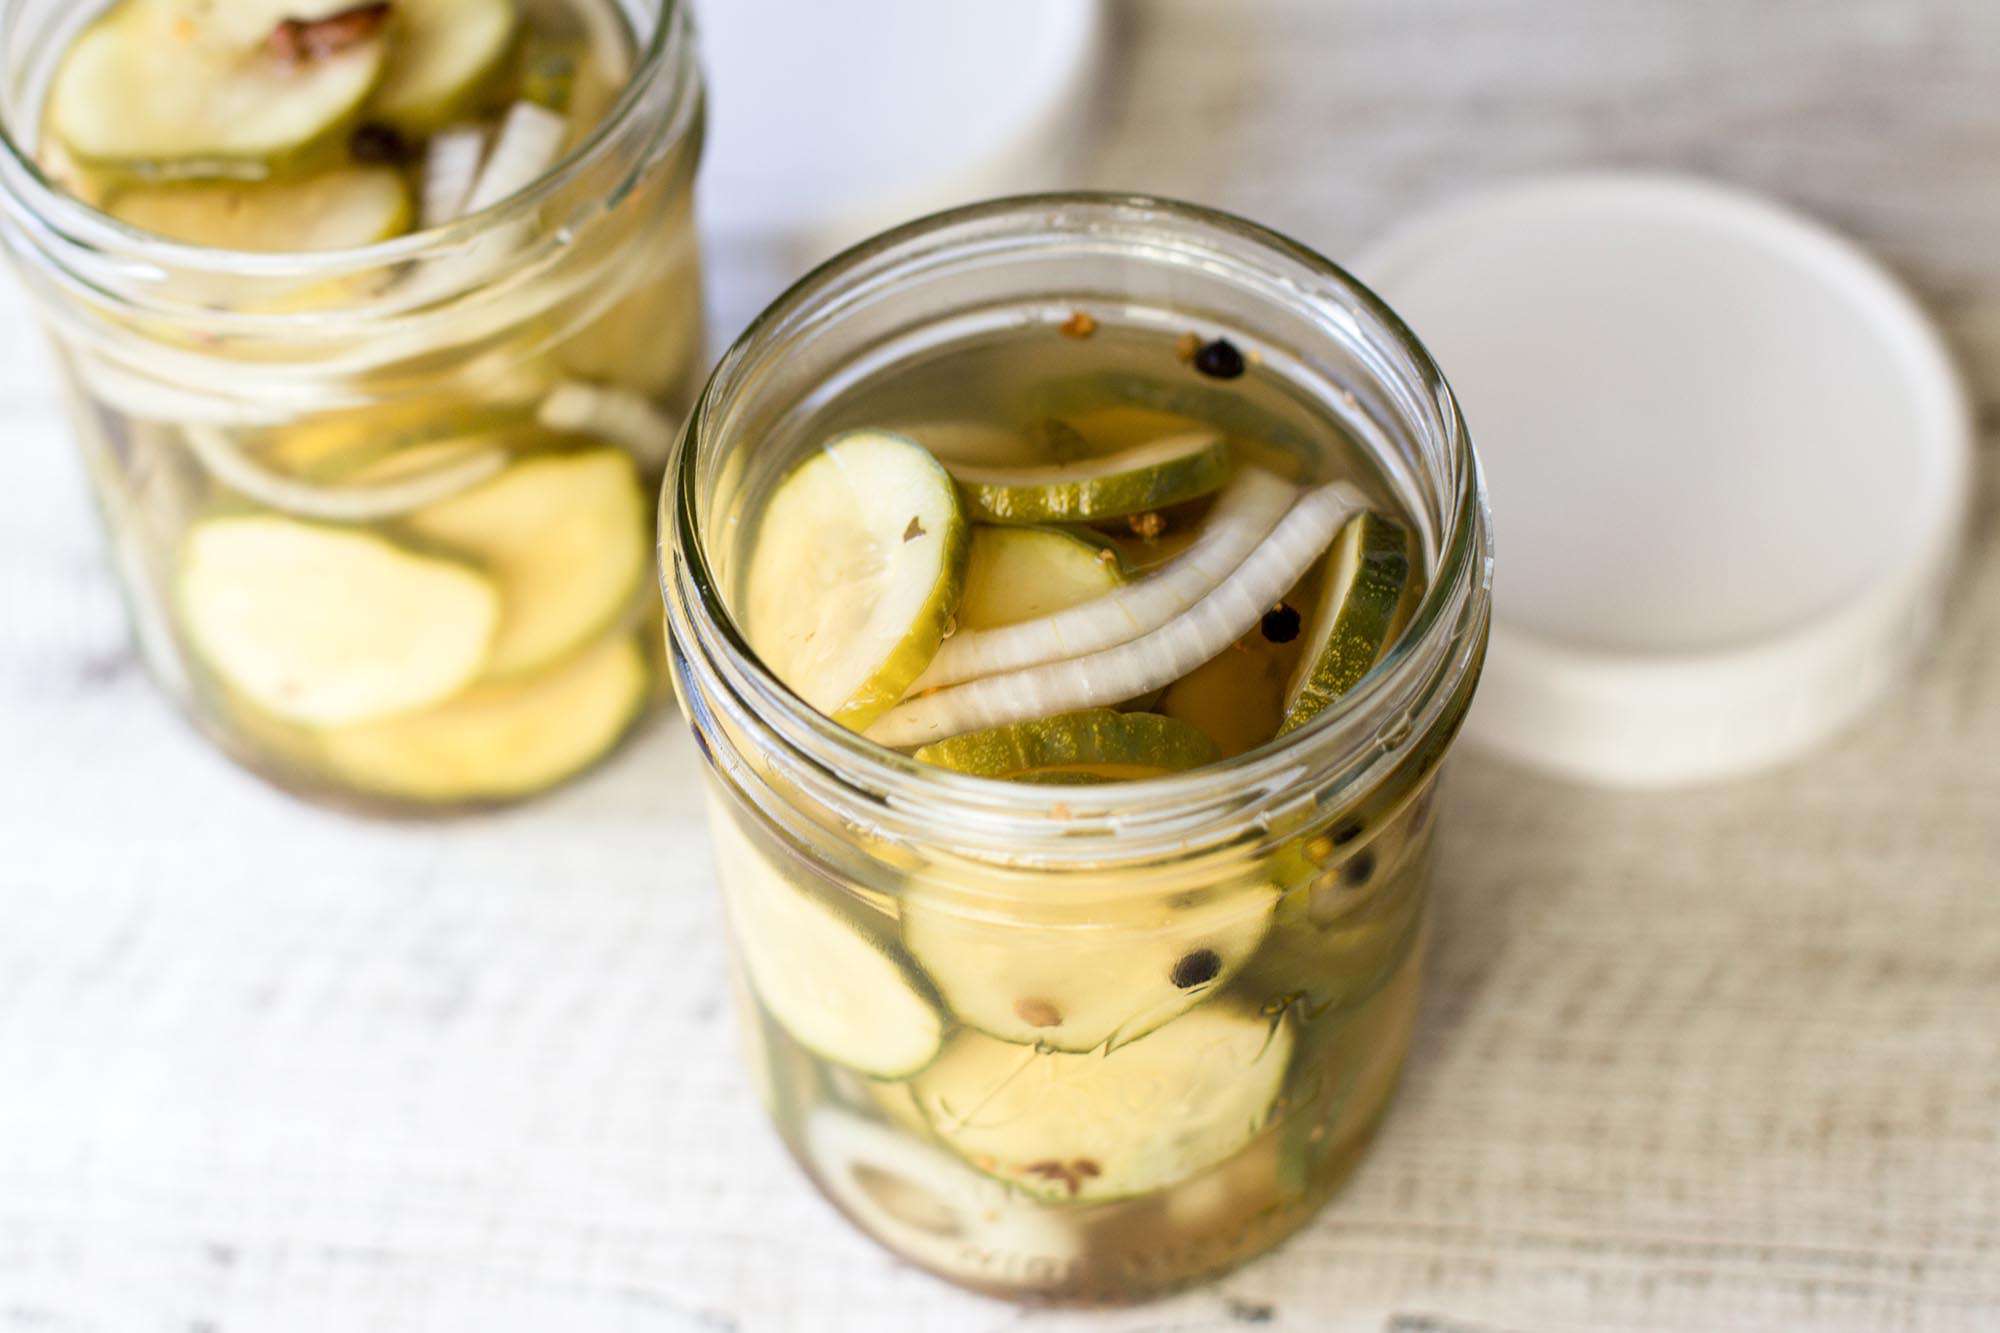 How To Store Homemade Pickles